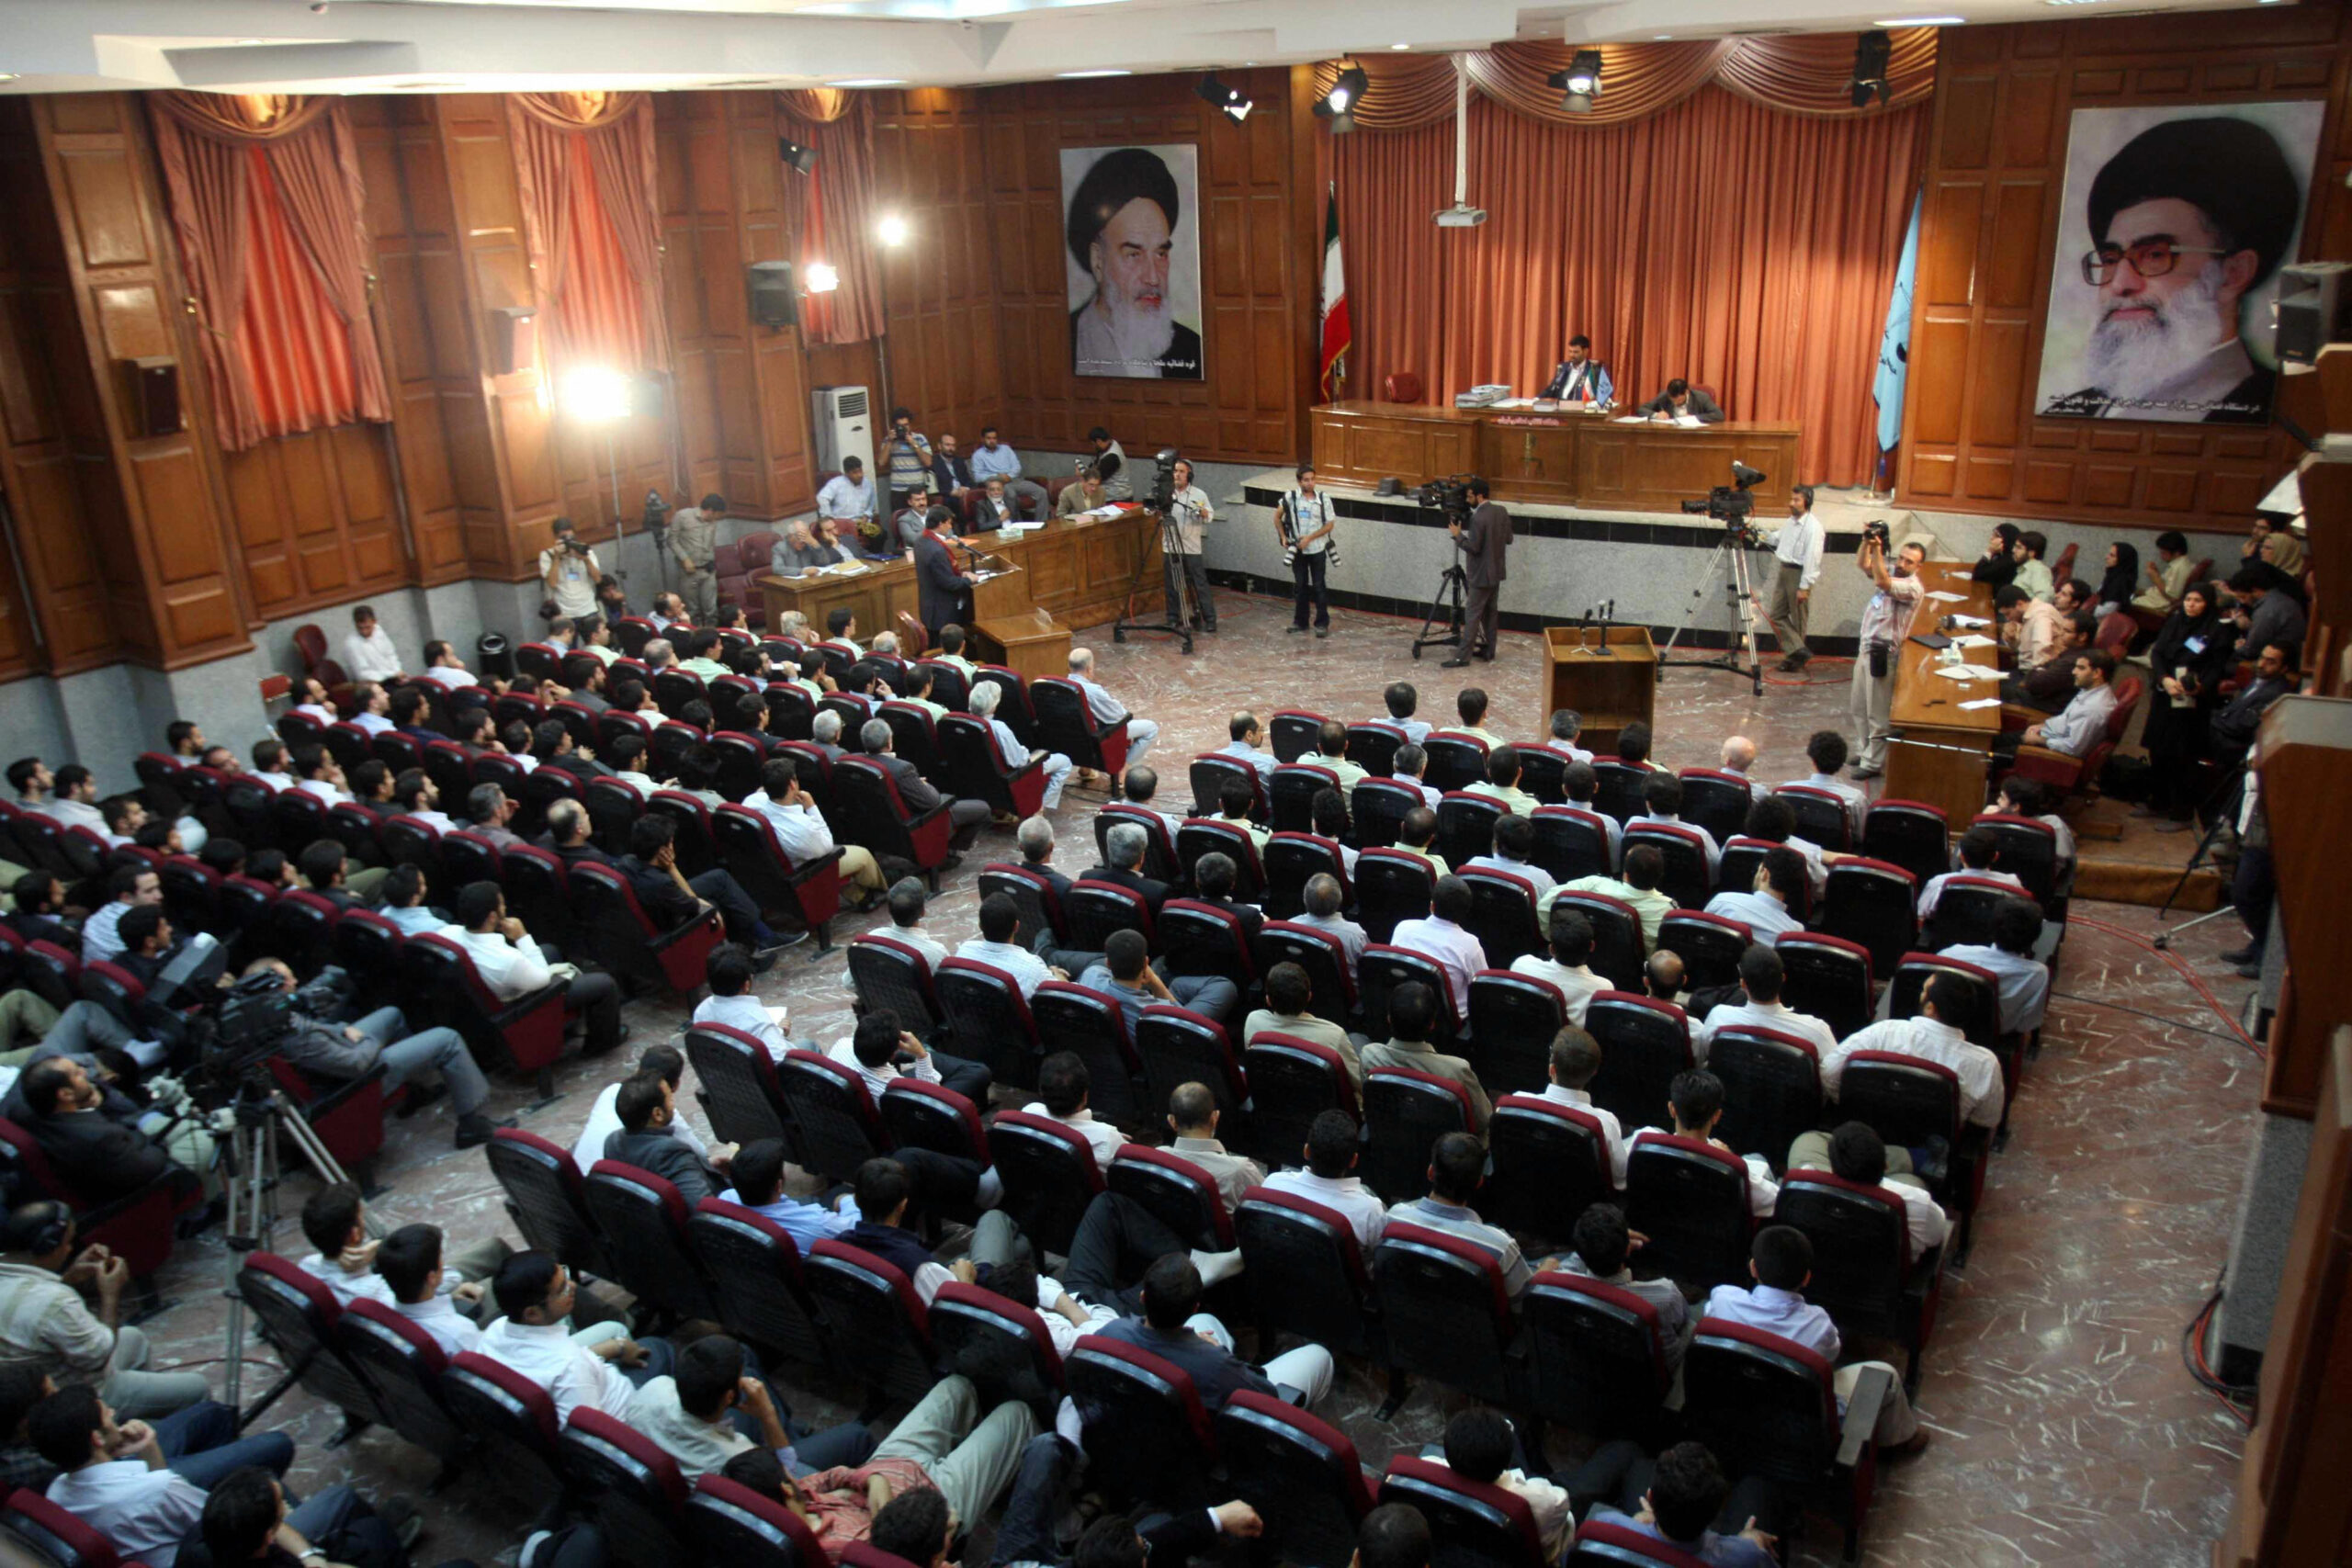 A general view of a courtroom shows suspected opposition supporters (in grey) attending the latest session in their trial at the revolutionary court in Tehran on August 25, 2009. Several aides to former Iranian president Mohammad Khatami and top reformists were put on trial on charges of masterminding the post-election unrest which rocked the Islamic republic. Among the some 20 people in the dock were a former minister and a number of other top political figures as well as journalists and academics. Portraits on the wall show the Islamic republic's supreme leader Ayatollah Ali Khamenei (R) and his predecessor, the late Ayatollah Ruhollah Khomeini. AFP PHOTO/FARS NEWS/HASSAN GHAEDI (Photo credit should read Hassan Ghaedi/AFP via Getty Images)